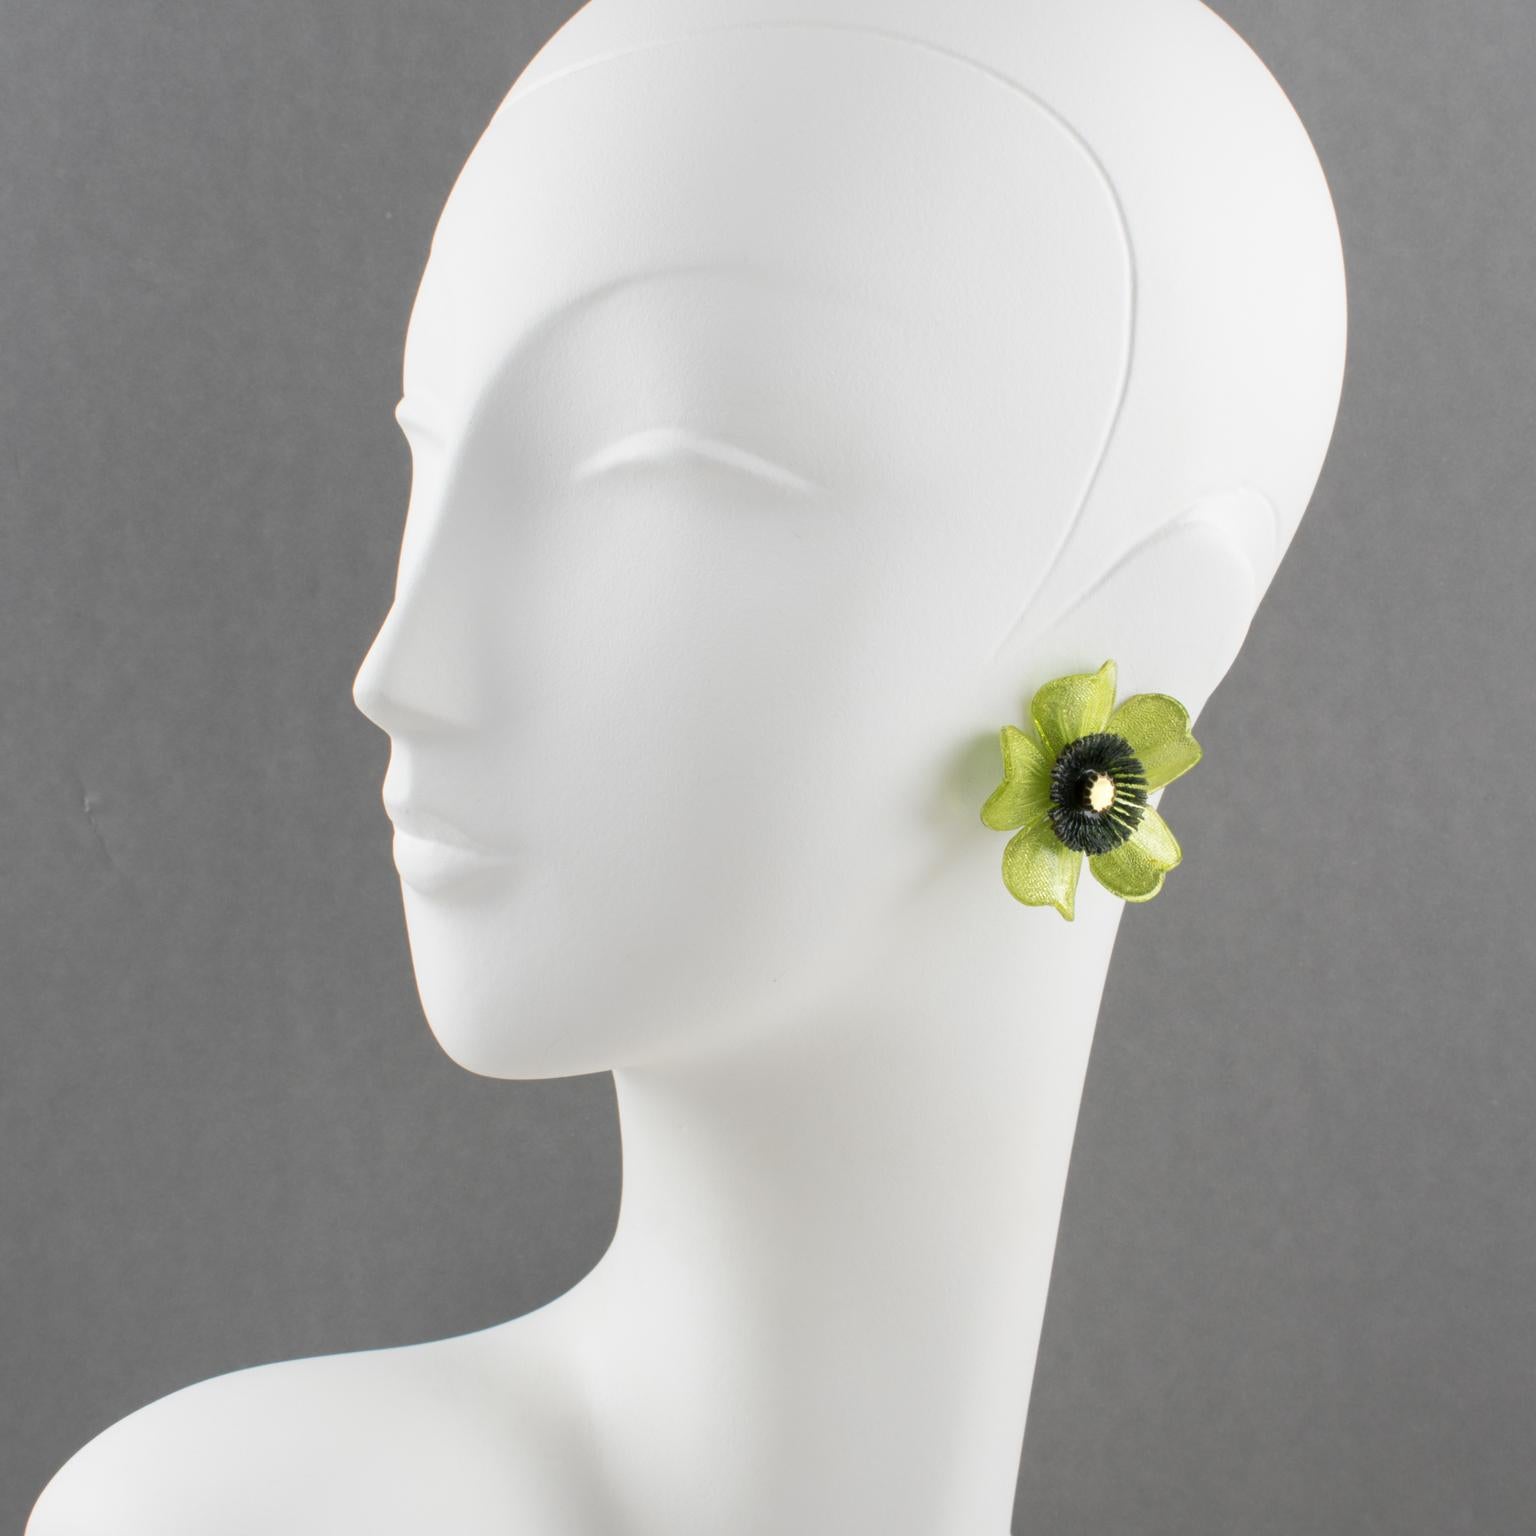 Lovely Monique Vedie resin or Talosel clip-on earrings. Features a daisy flower shape with a carved dimensional design complimented with a textured pattern in glittering pistachio green and black colors with a tiny mirror heart. French clip